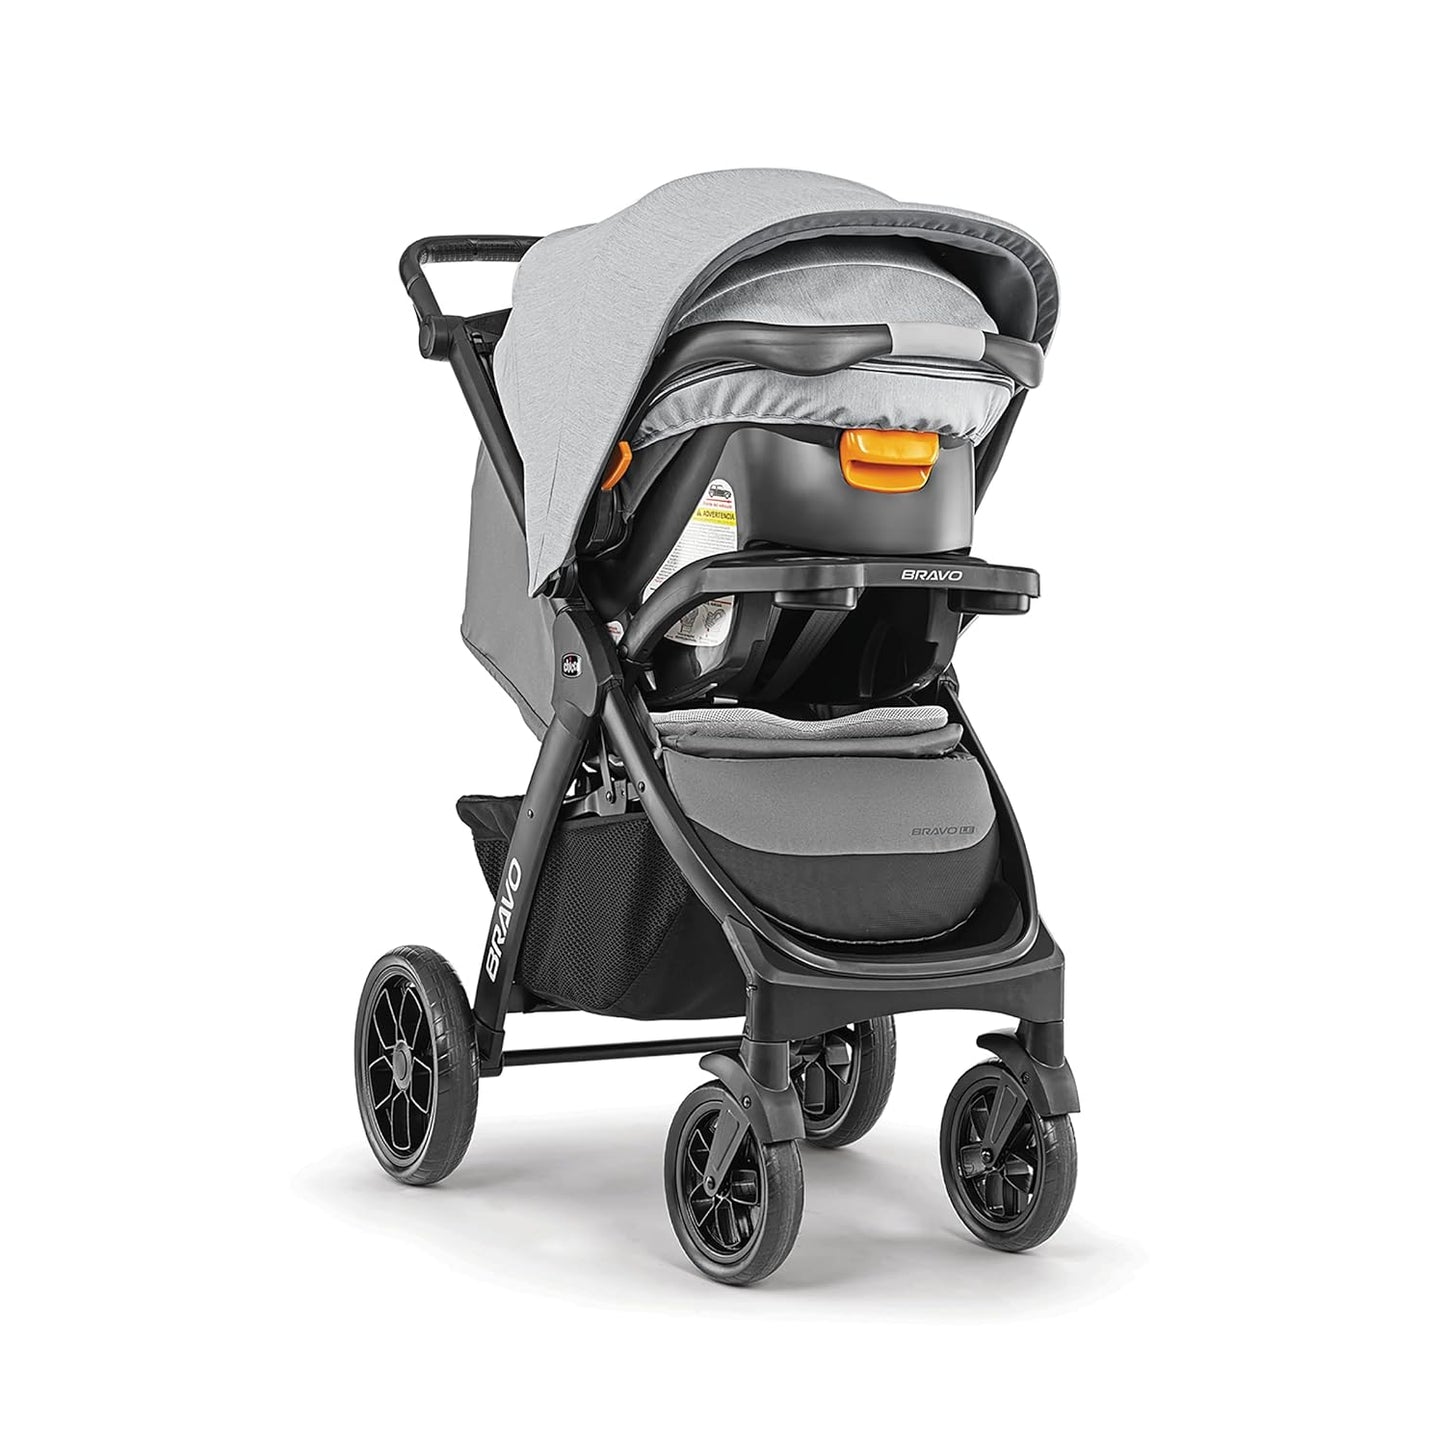 Chicco Bravo 3-in-1 Trio Travel System, Quick-Fold Stroller with KeyFit 30 Infant Car Seat and base | Camden/Black